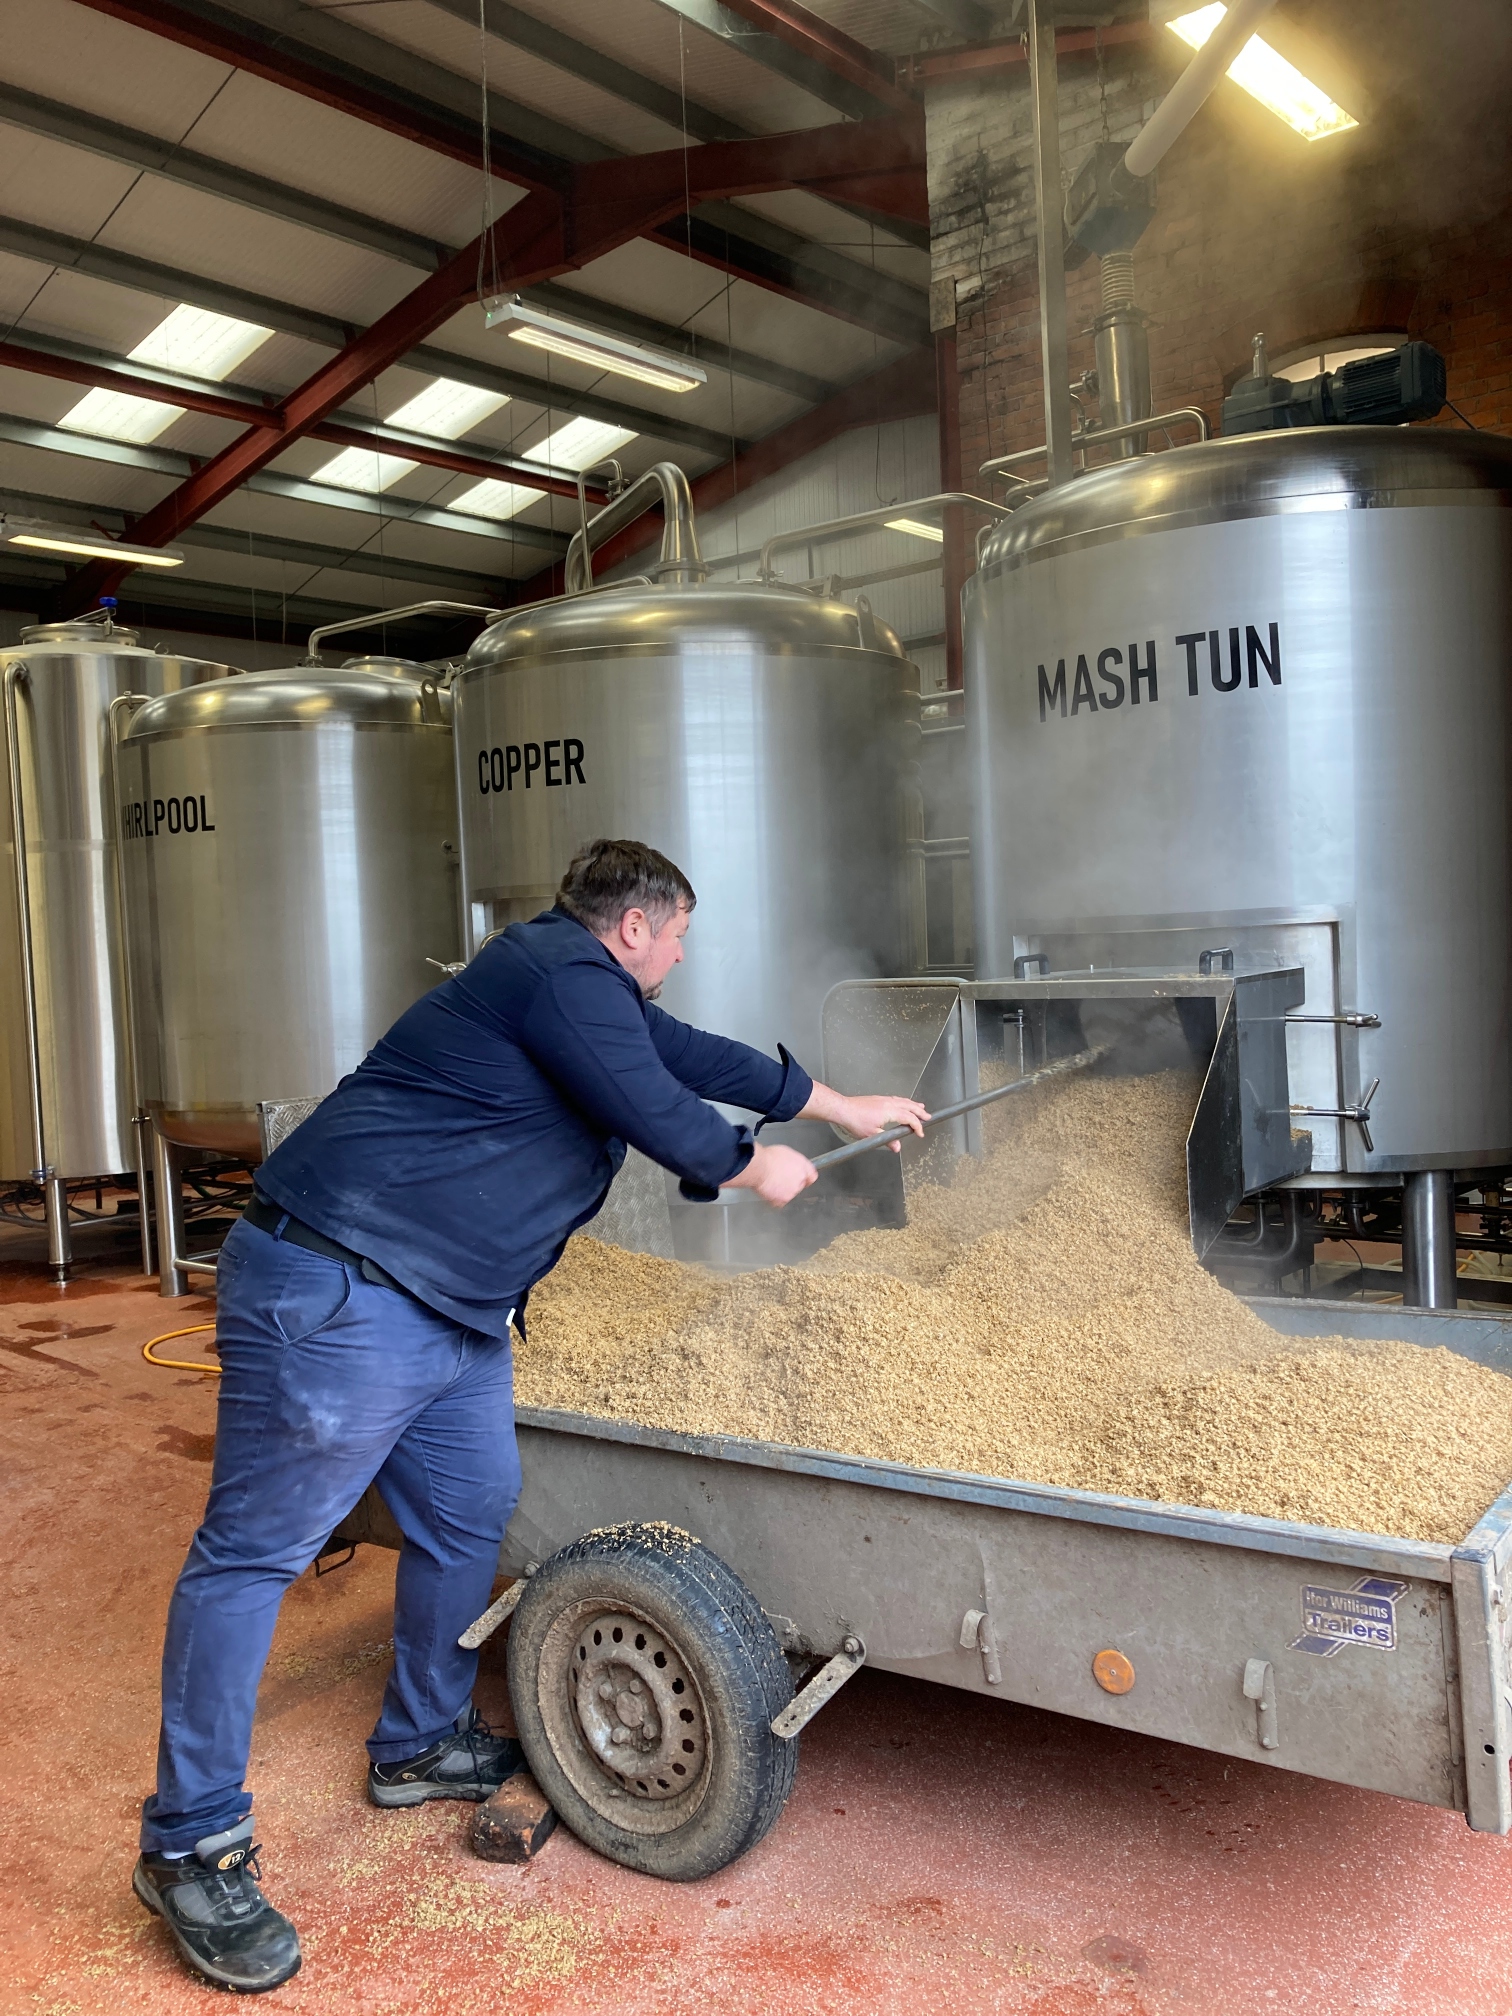 Emptying the mash tun at the Redwillow Brewery during the Crisp Malt beer collab.